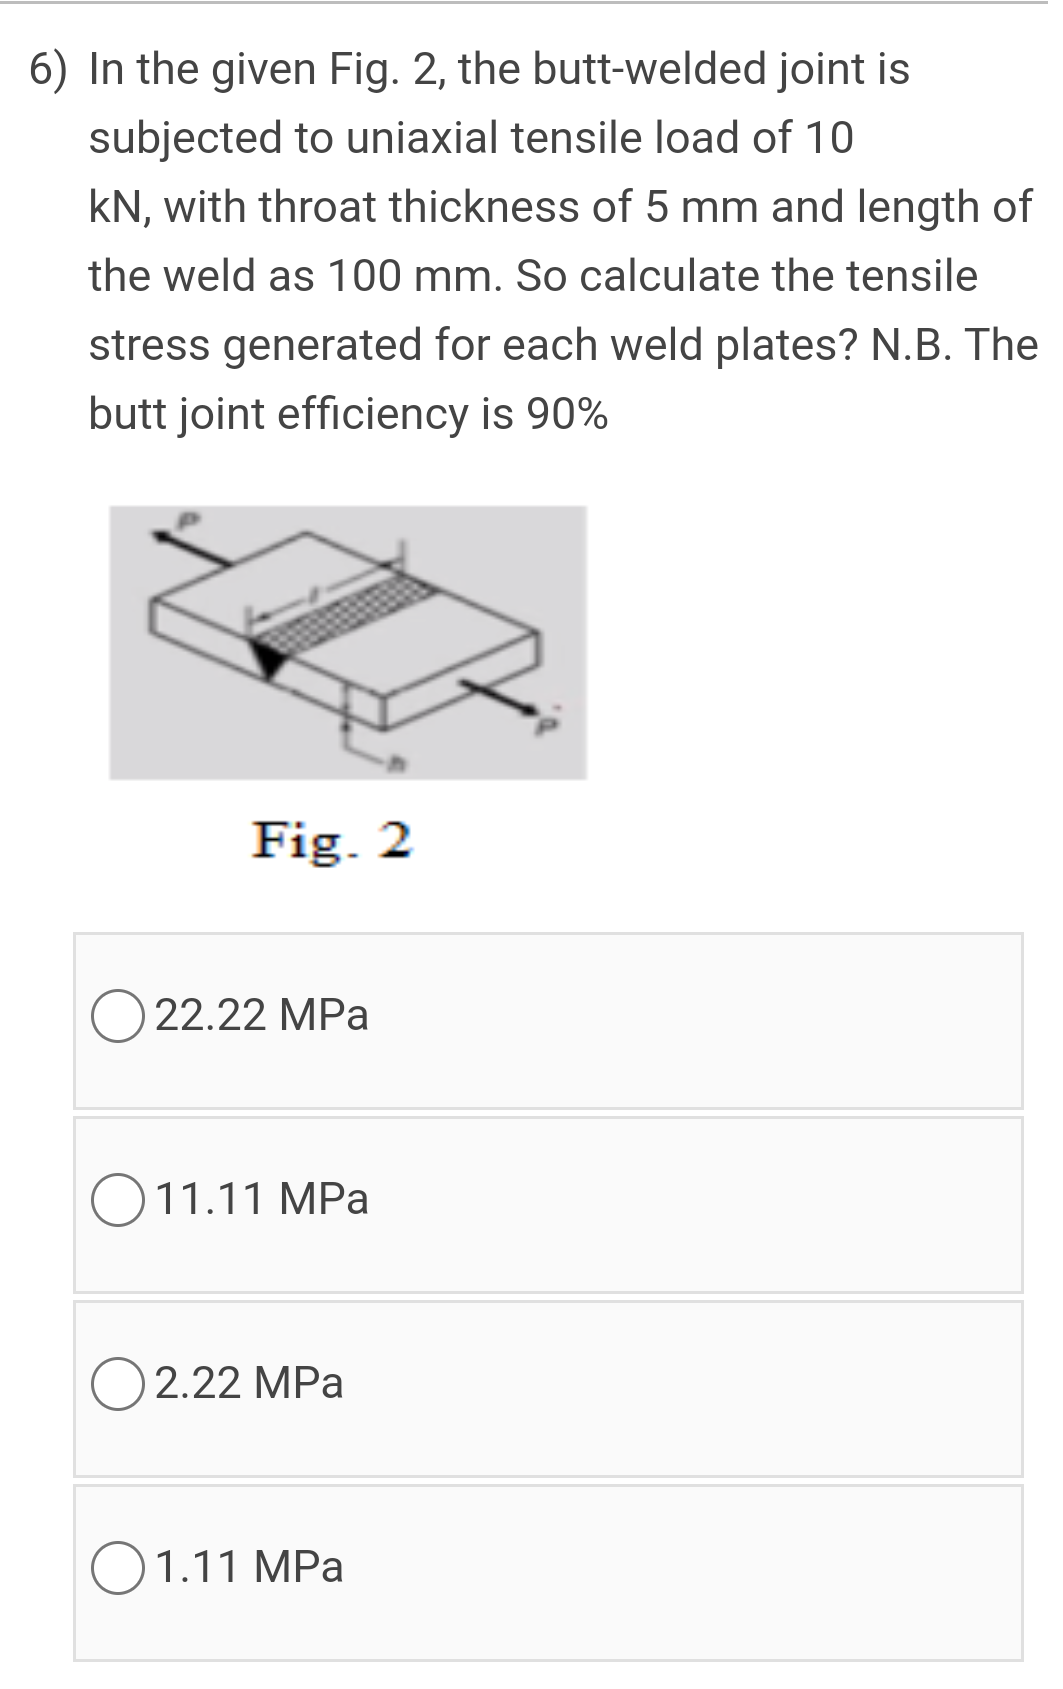 6) In the given Fig. 2, the butt-welded joint is
subjected to uniaxial tensile load of 10
kN, with throat thickness of 5 mm and length of
the weld as 100 mm. So calculate the tensile
stress generated for each weld plates? N.B. The
butt joint efficiency is 90%
Fig. 2
O 22.22 MPa
O11.11 MPa
2.22 MPa
O1.11 MPa
